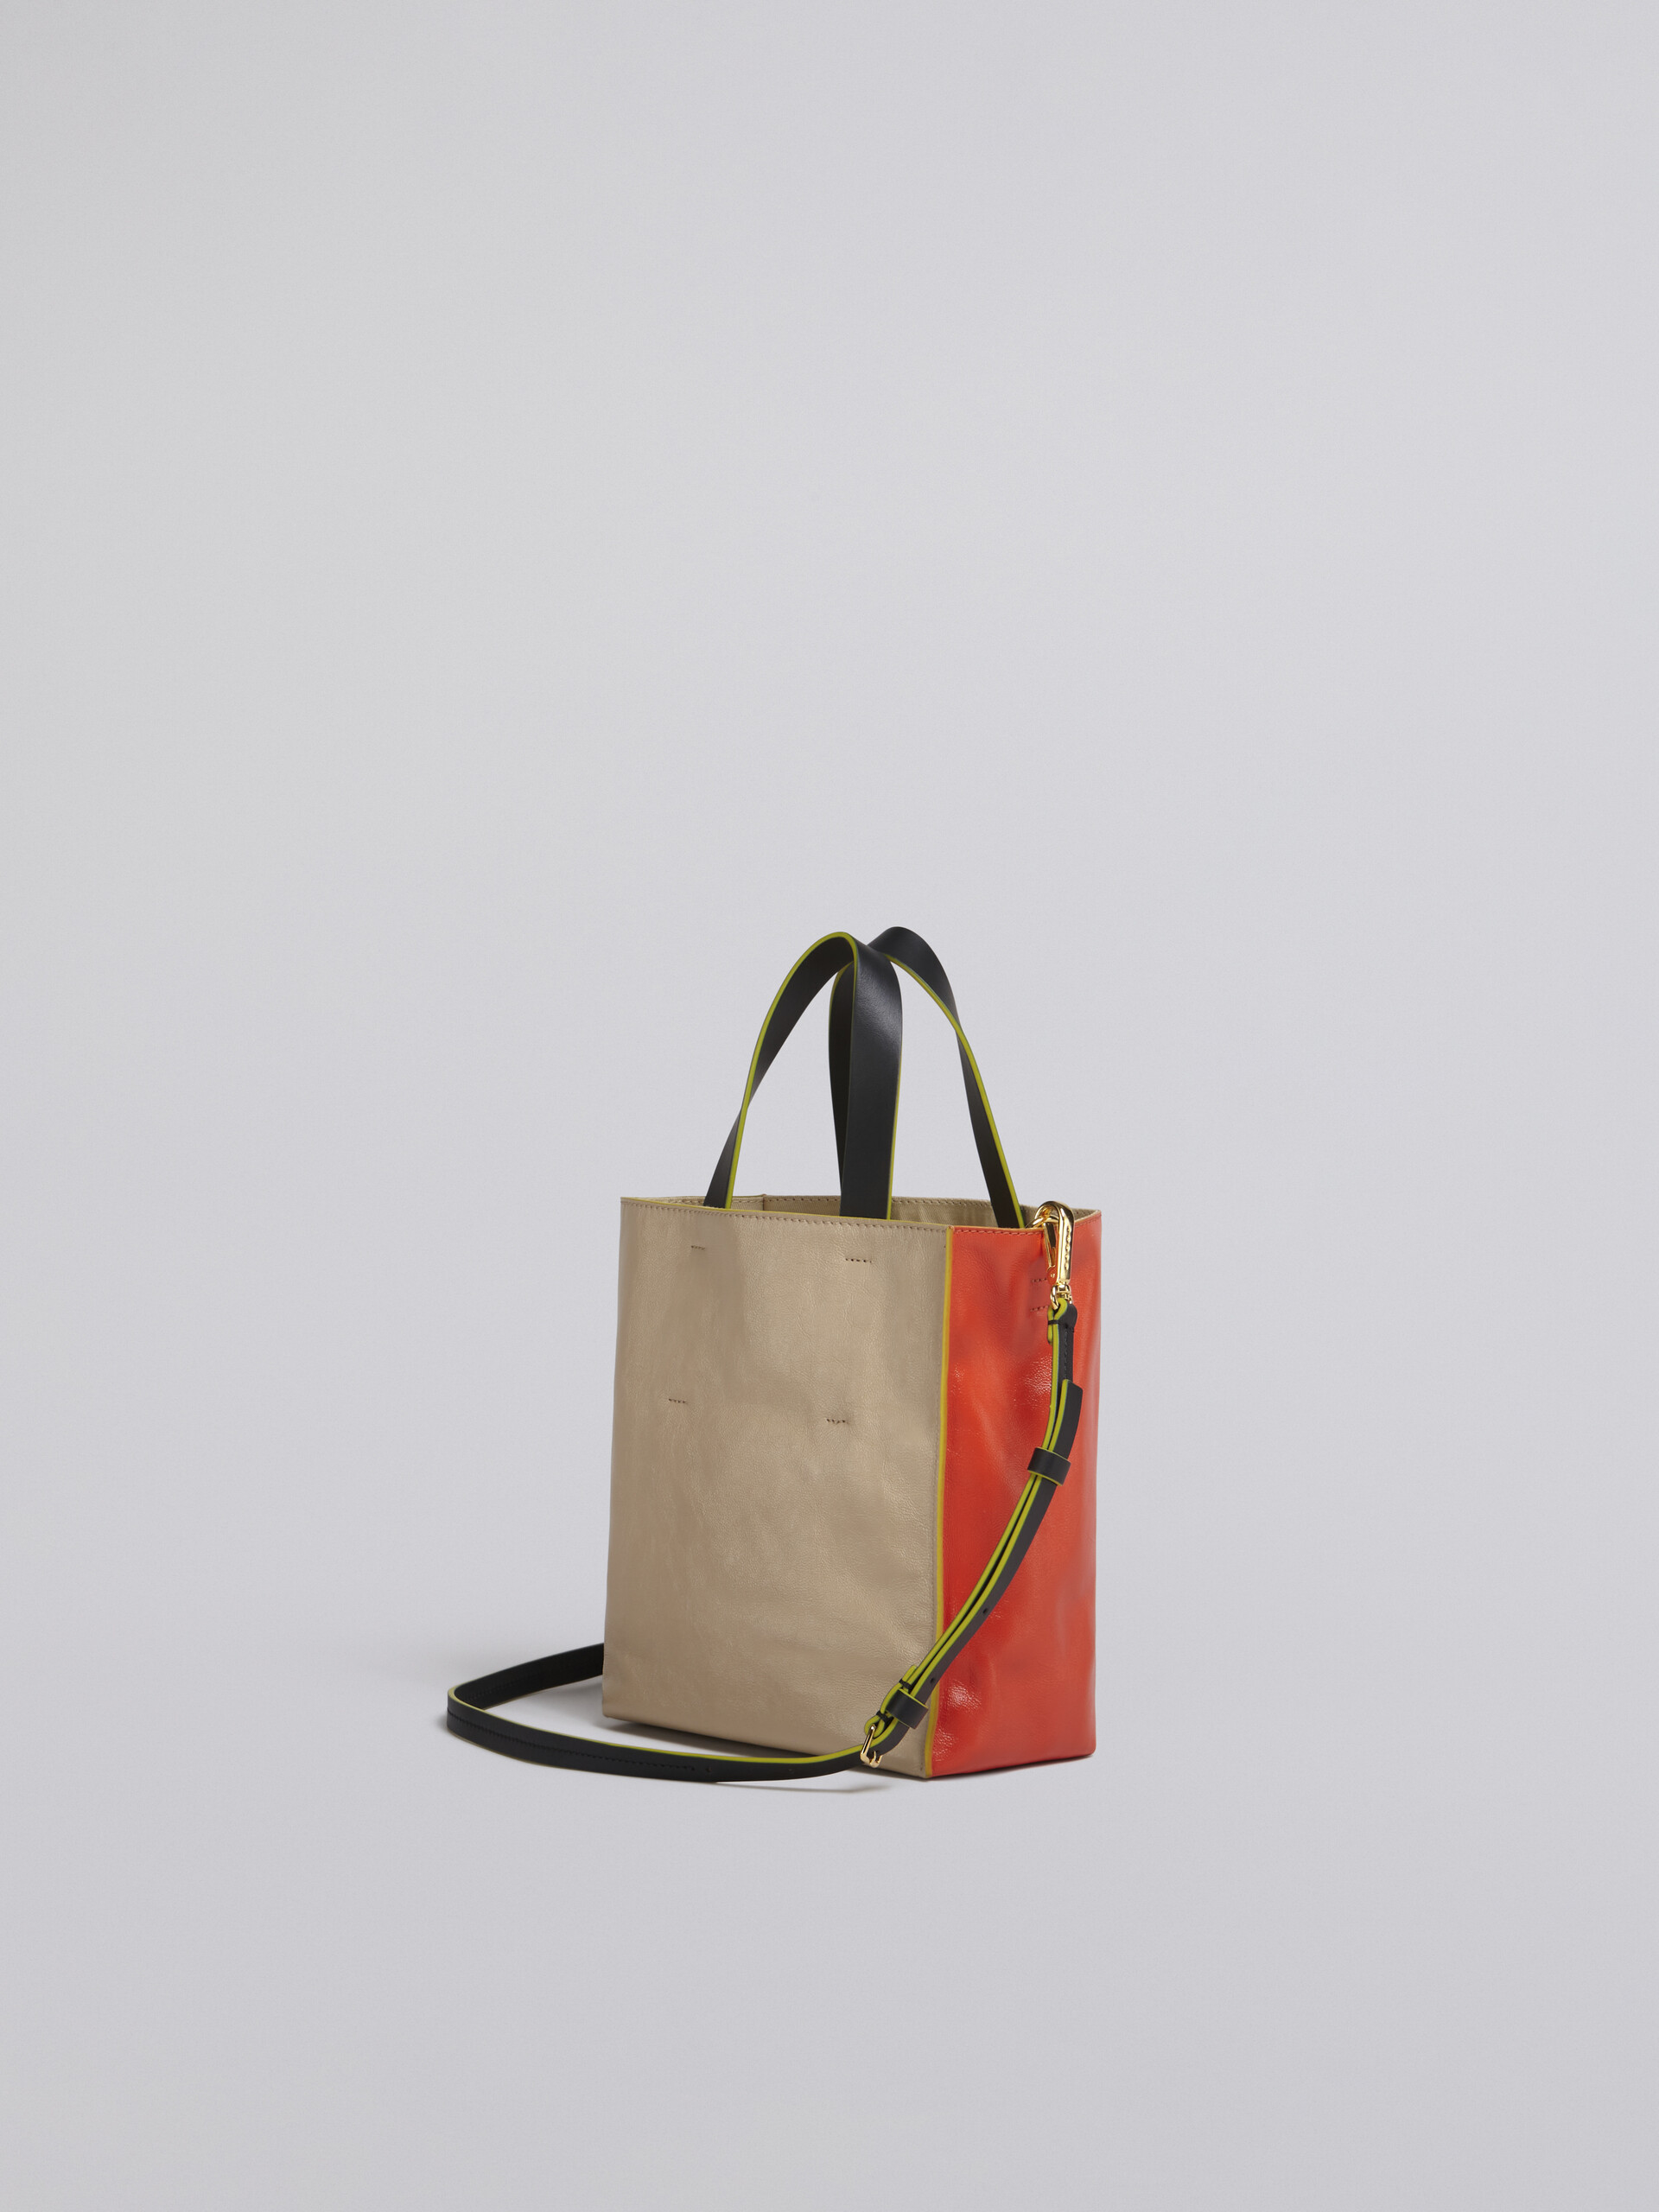 MUSEO SOFT mini bag in beige and orange leather - Shopping Bags - Image 2